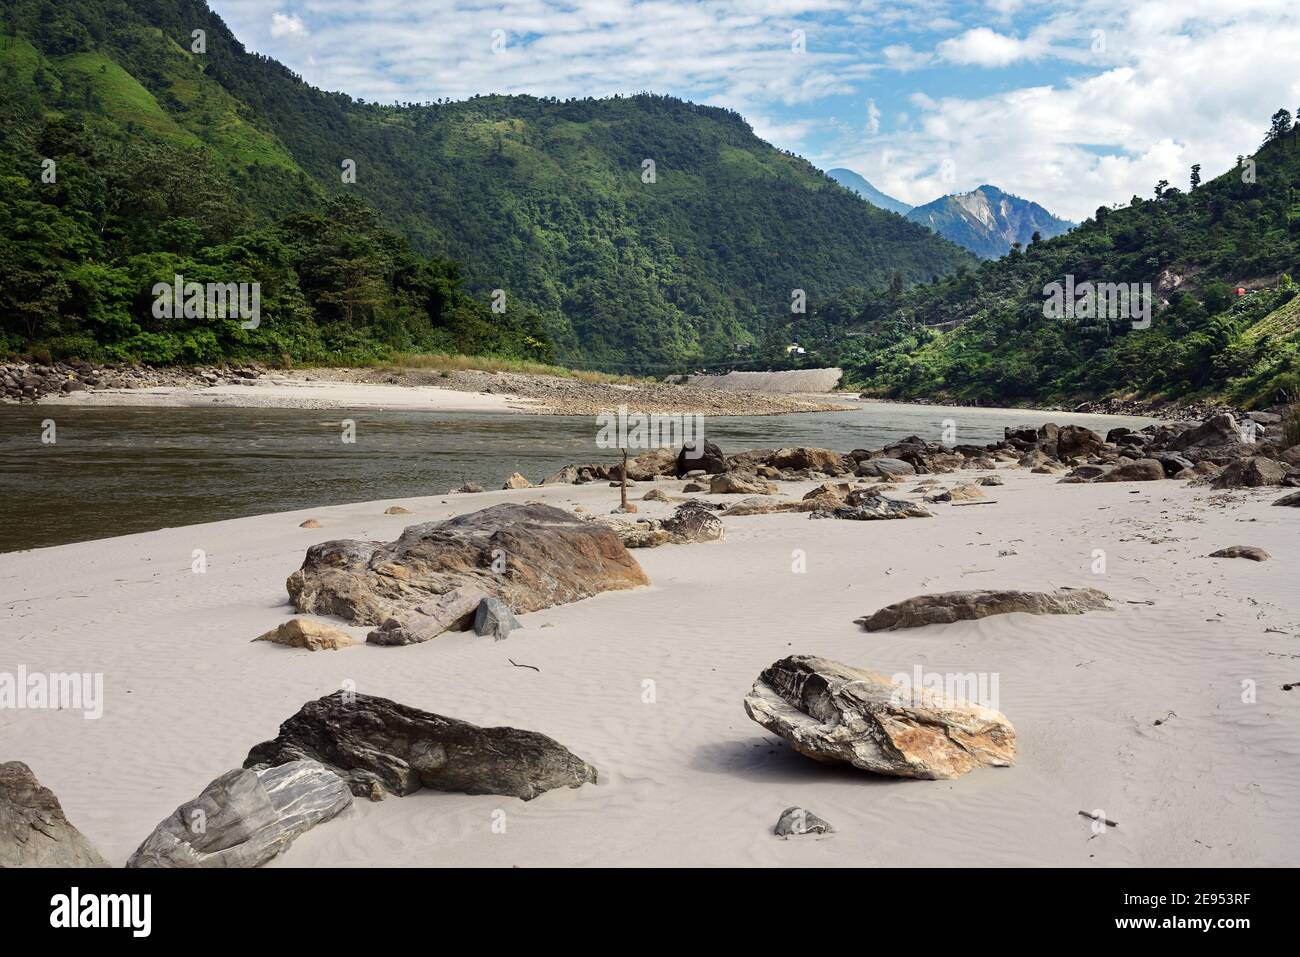 The Trishuli River is a major tributary of the Narayani River in central Nepal but originates in Tibet. Here it is adjacent to the Prithvi Highway. Stock Photo